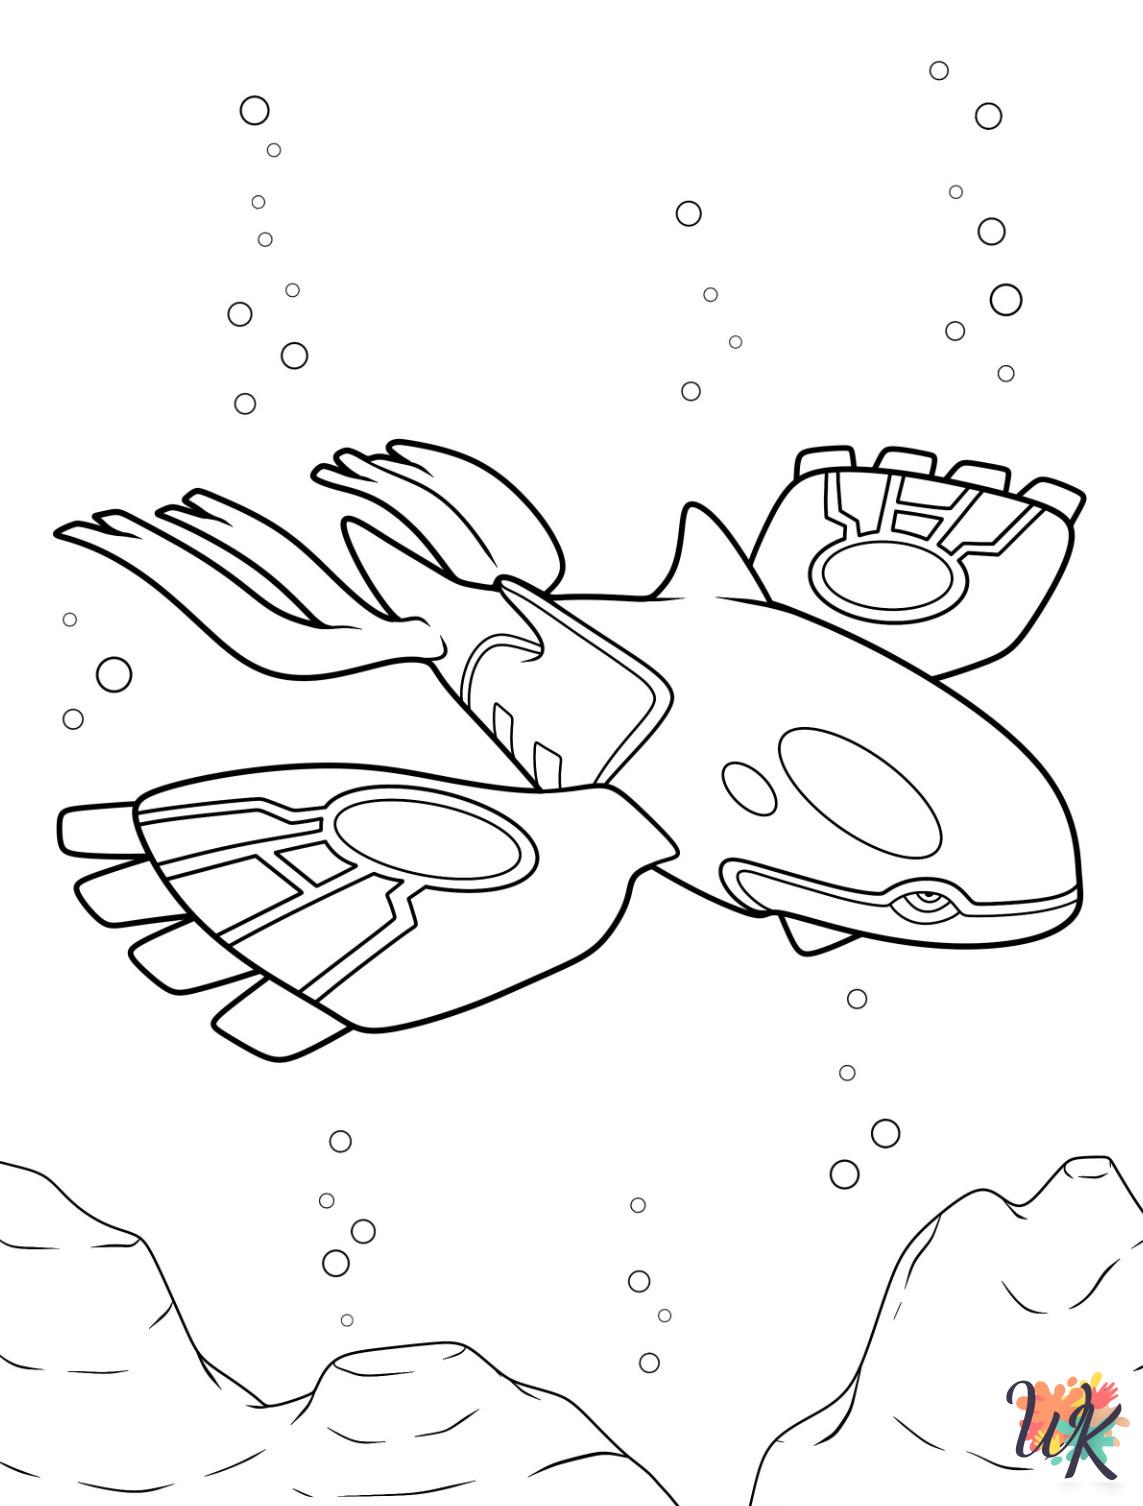 Legendary Pokemon coloring pages for adults